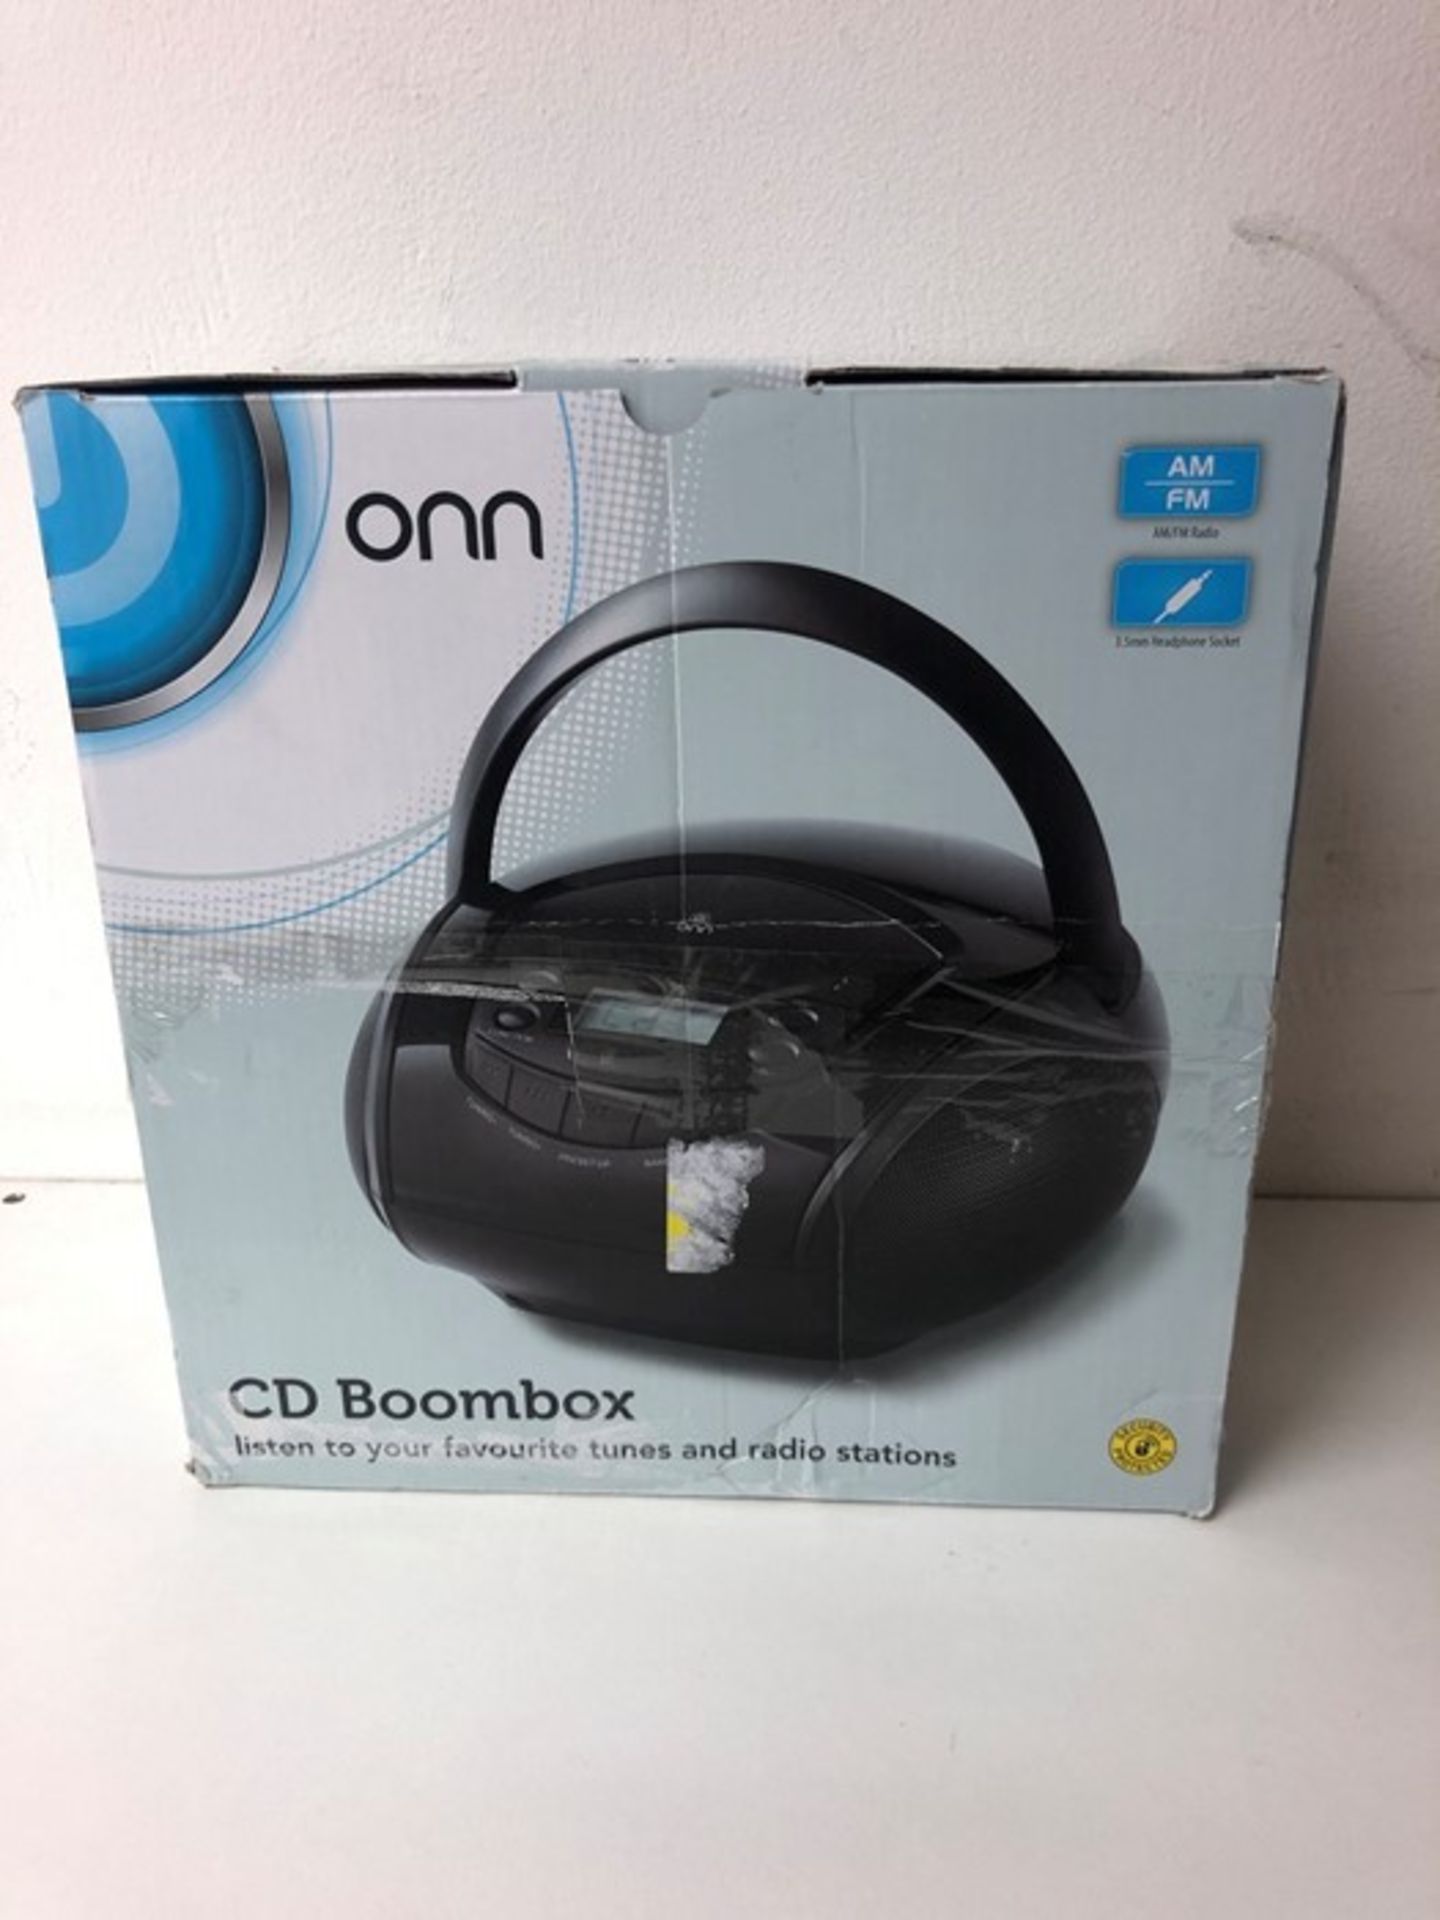 1 BOXED ONN CD BOOMBOX IN BLACK / RRP £20.00 - BL -3813 (VIEWING HIGHLY RECOMMENDED)